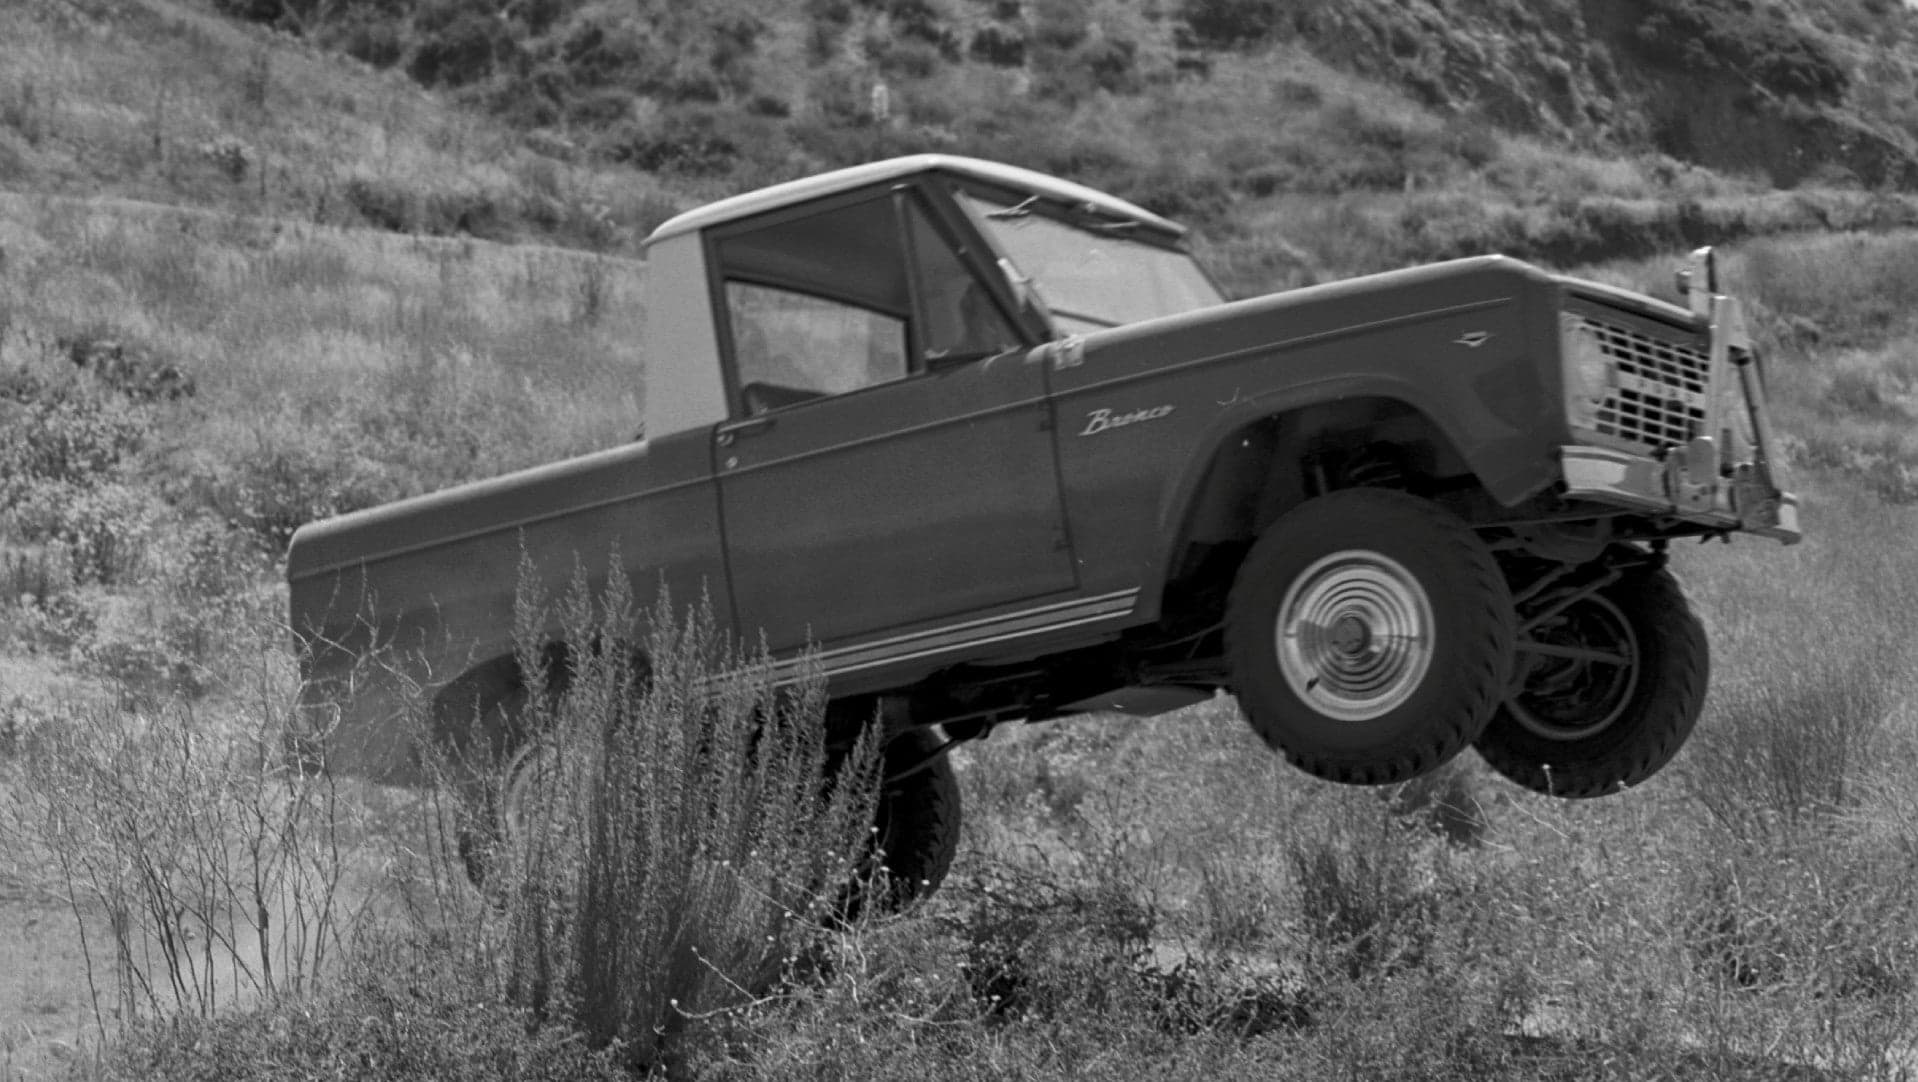 2020 Ford Bronco Will Have a 325-HP Turbocharged V6, Report Says